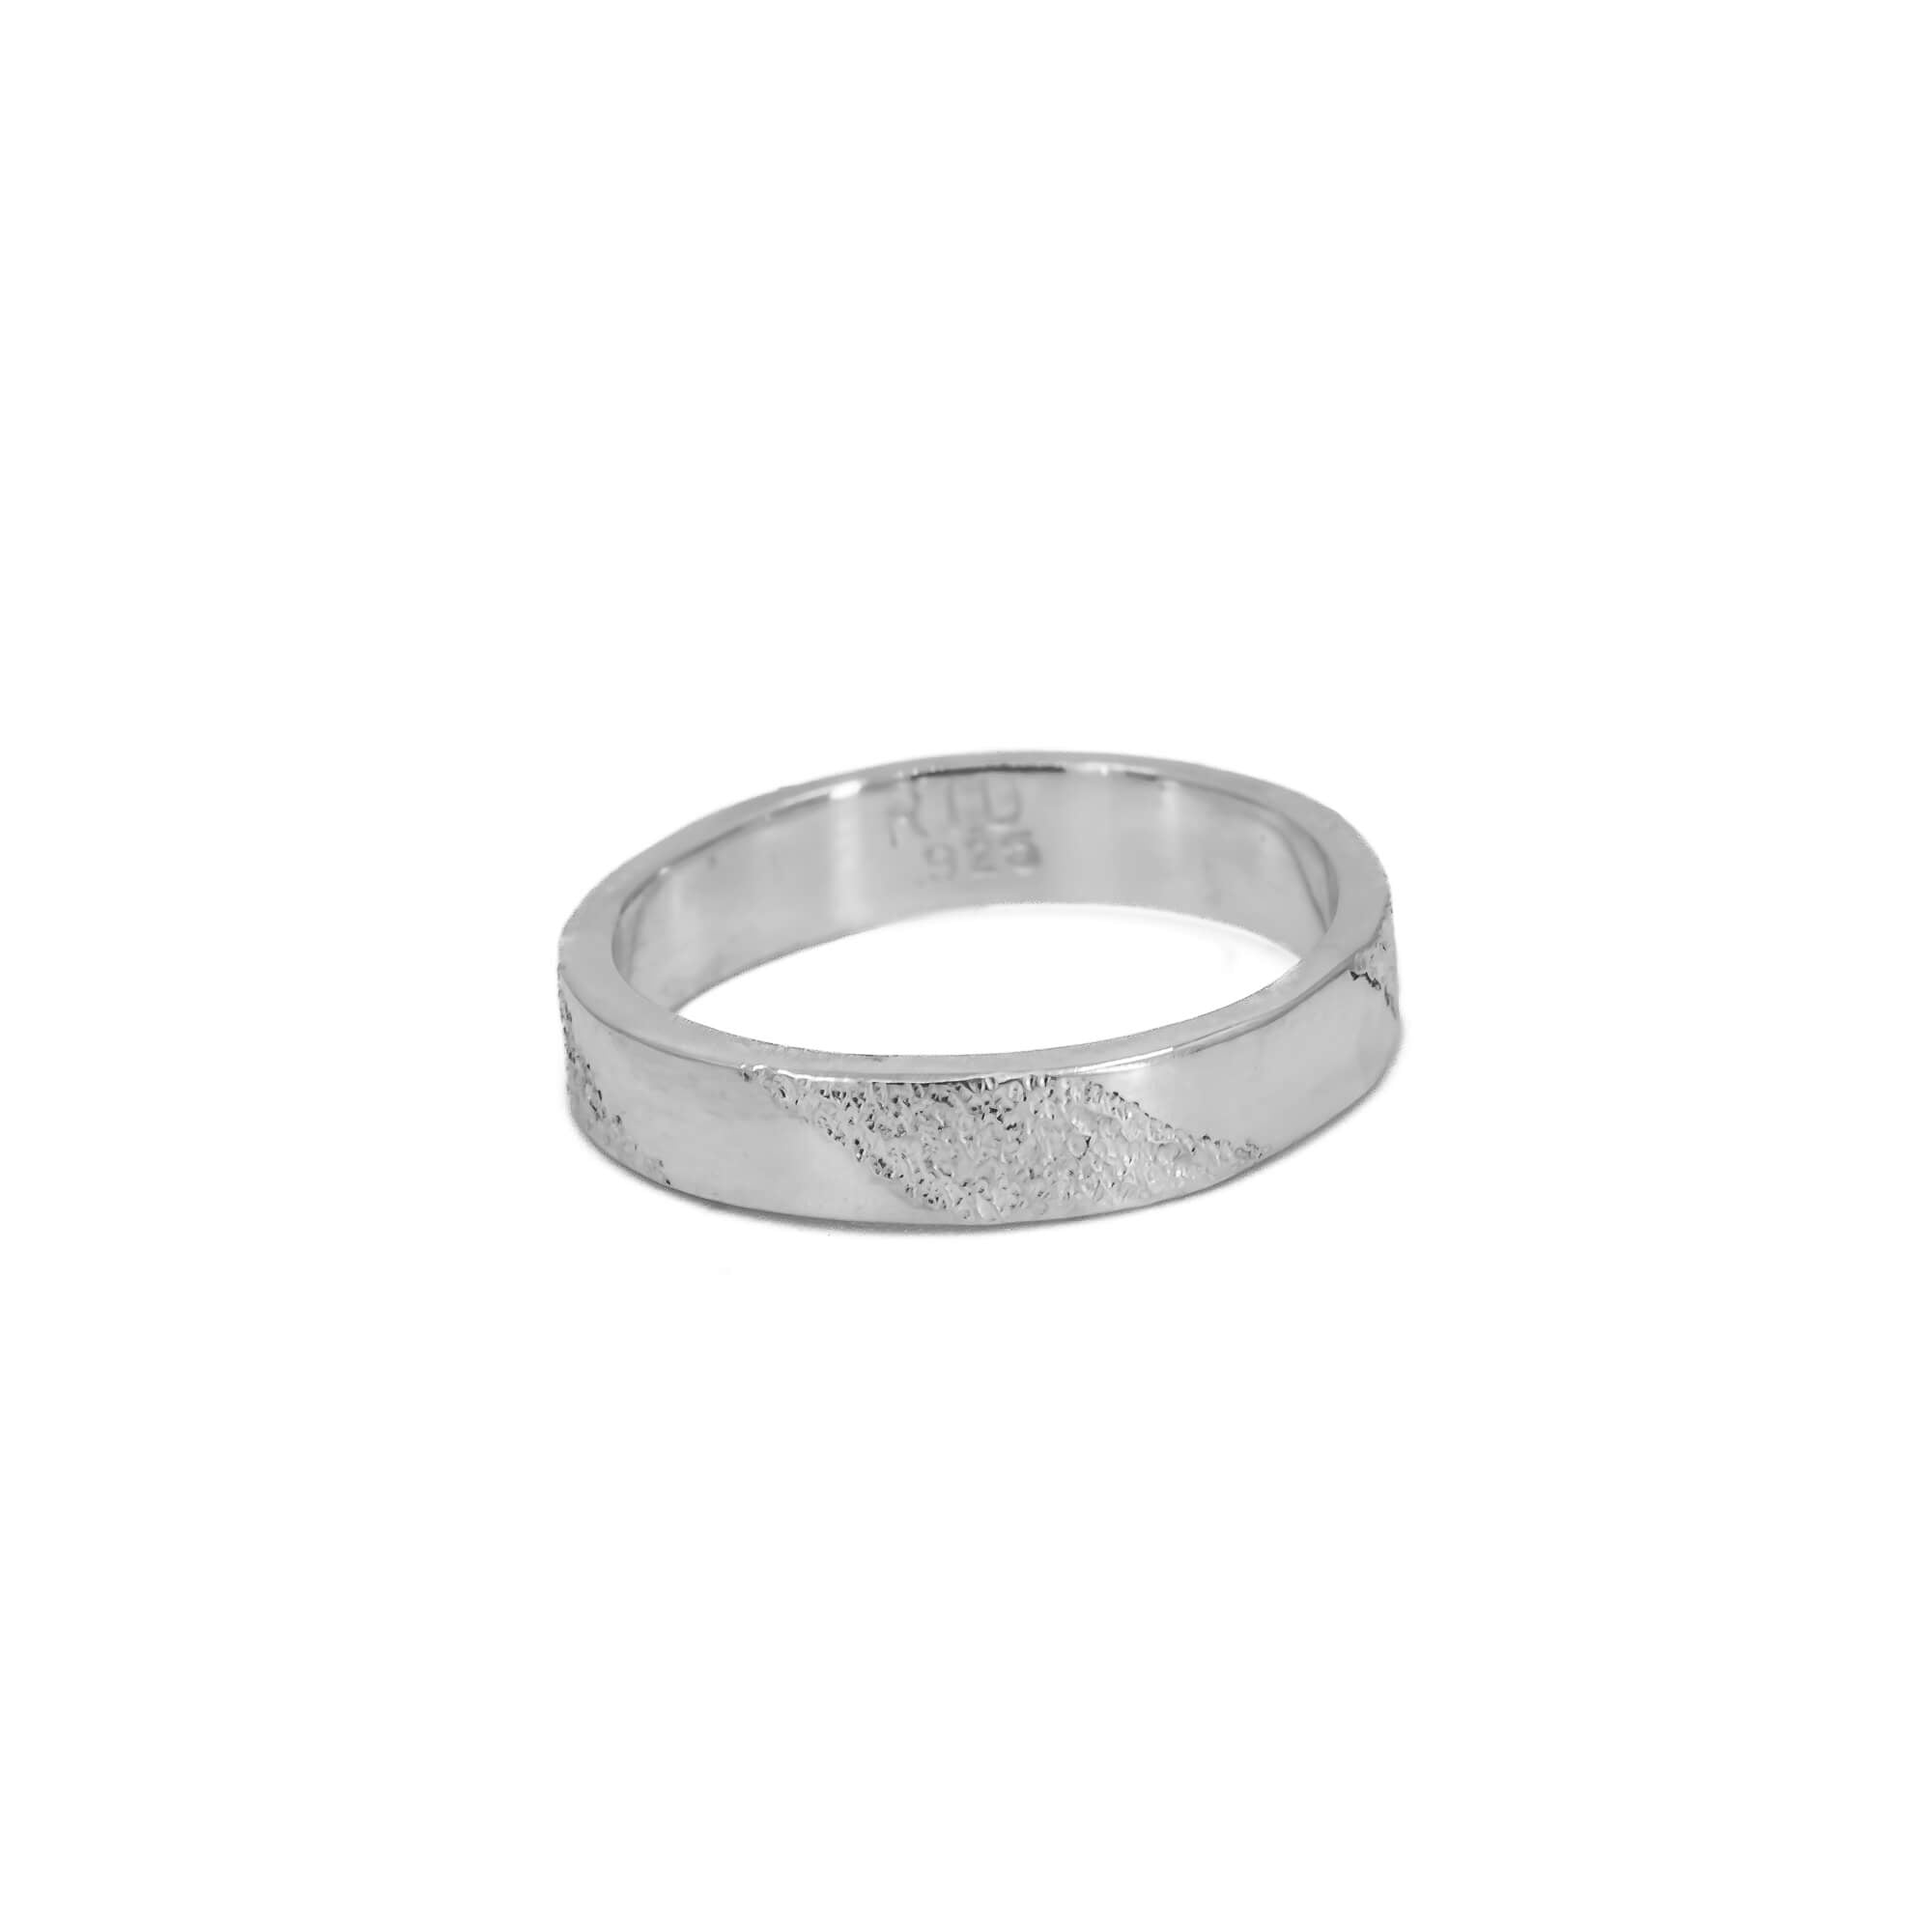 Sterling silver stardust textured ring